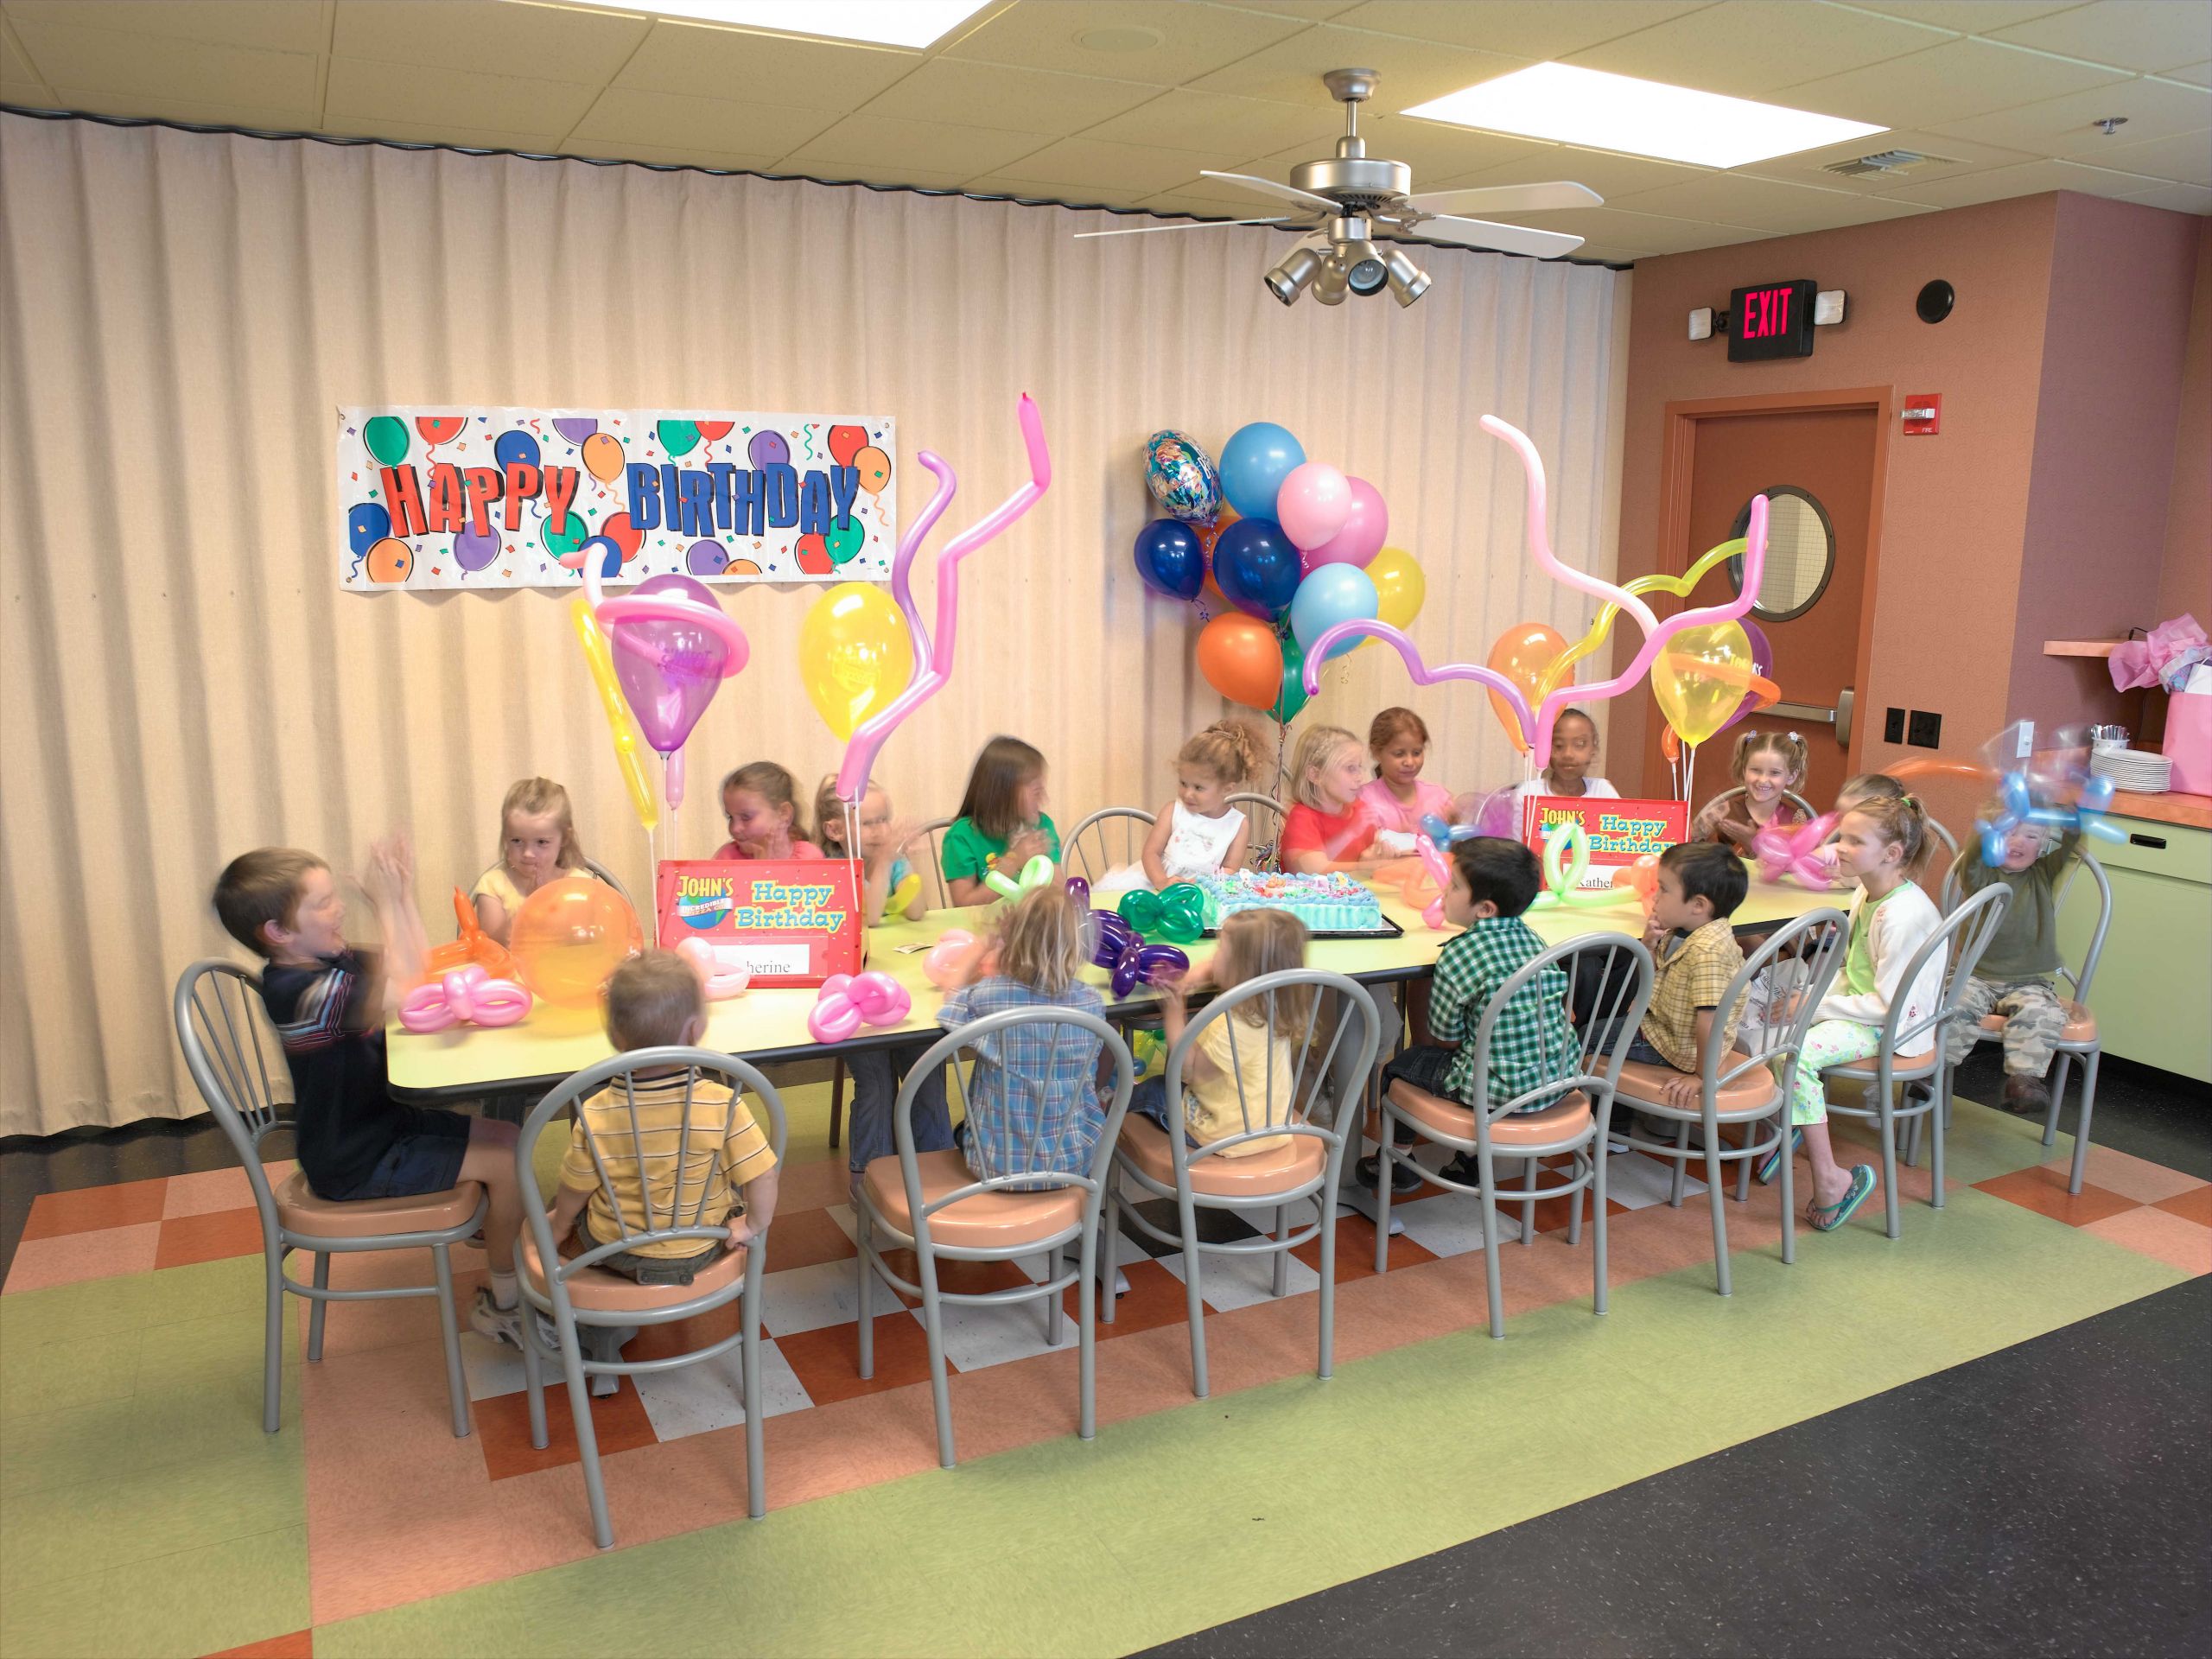 Children Birthday Party Planning
 Ideas for Planning an Affordable Birthday Party for Your